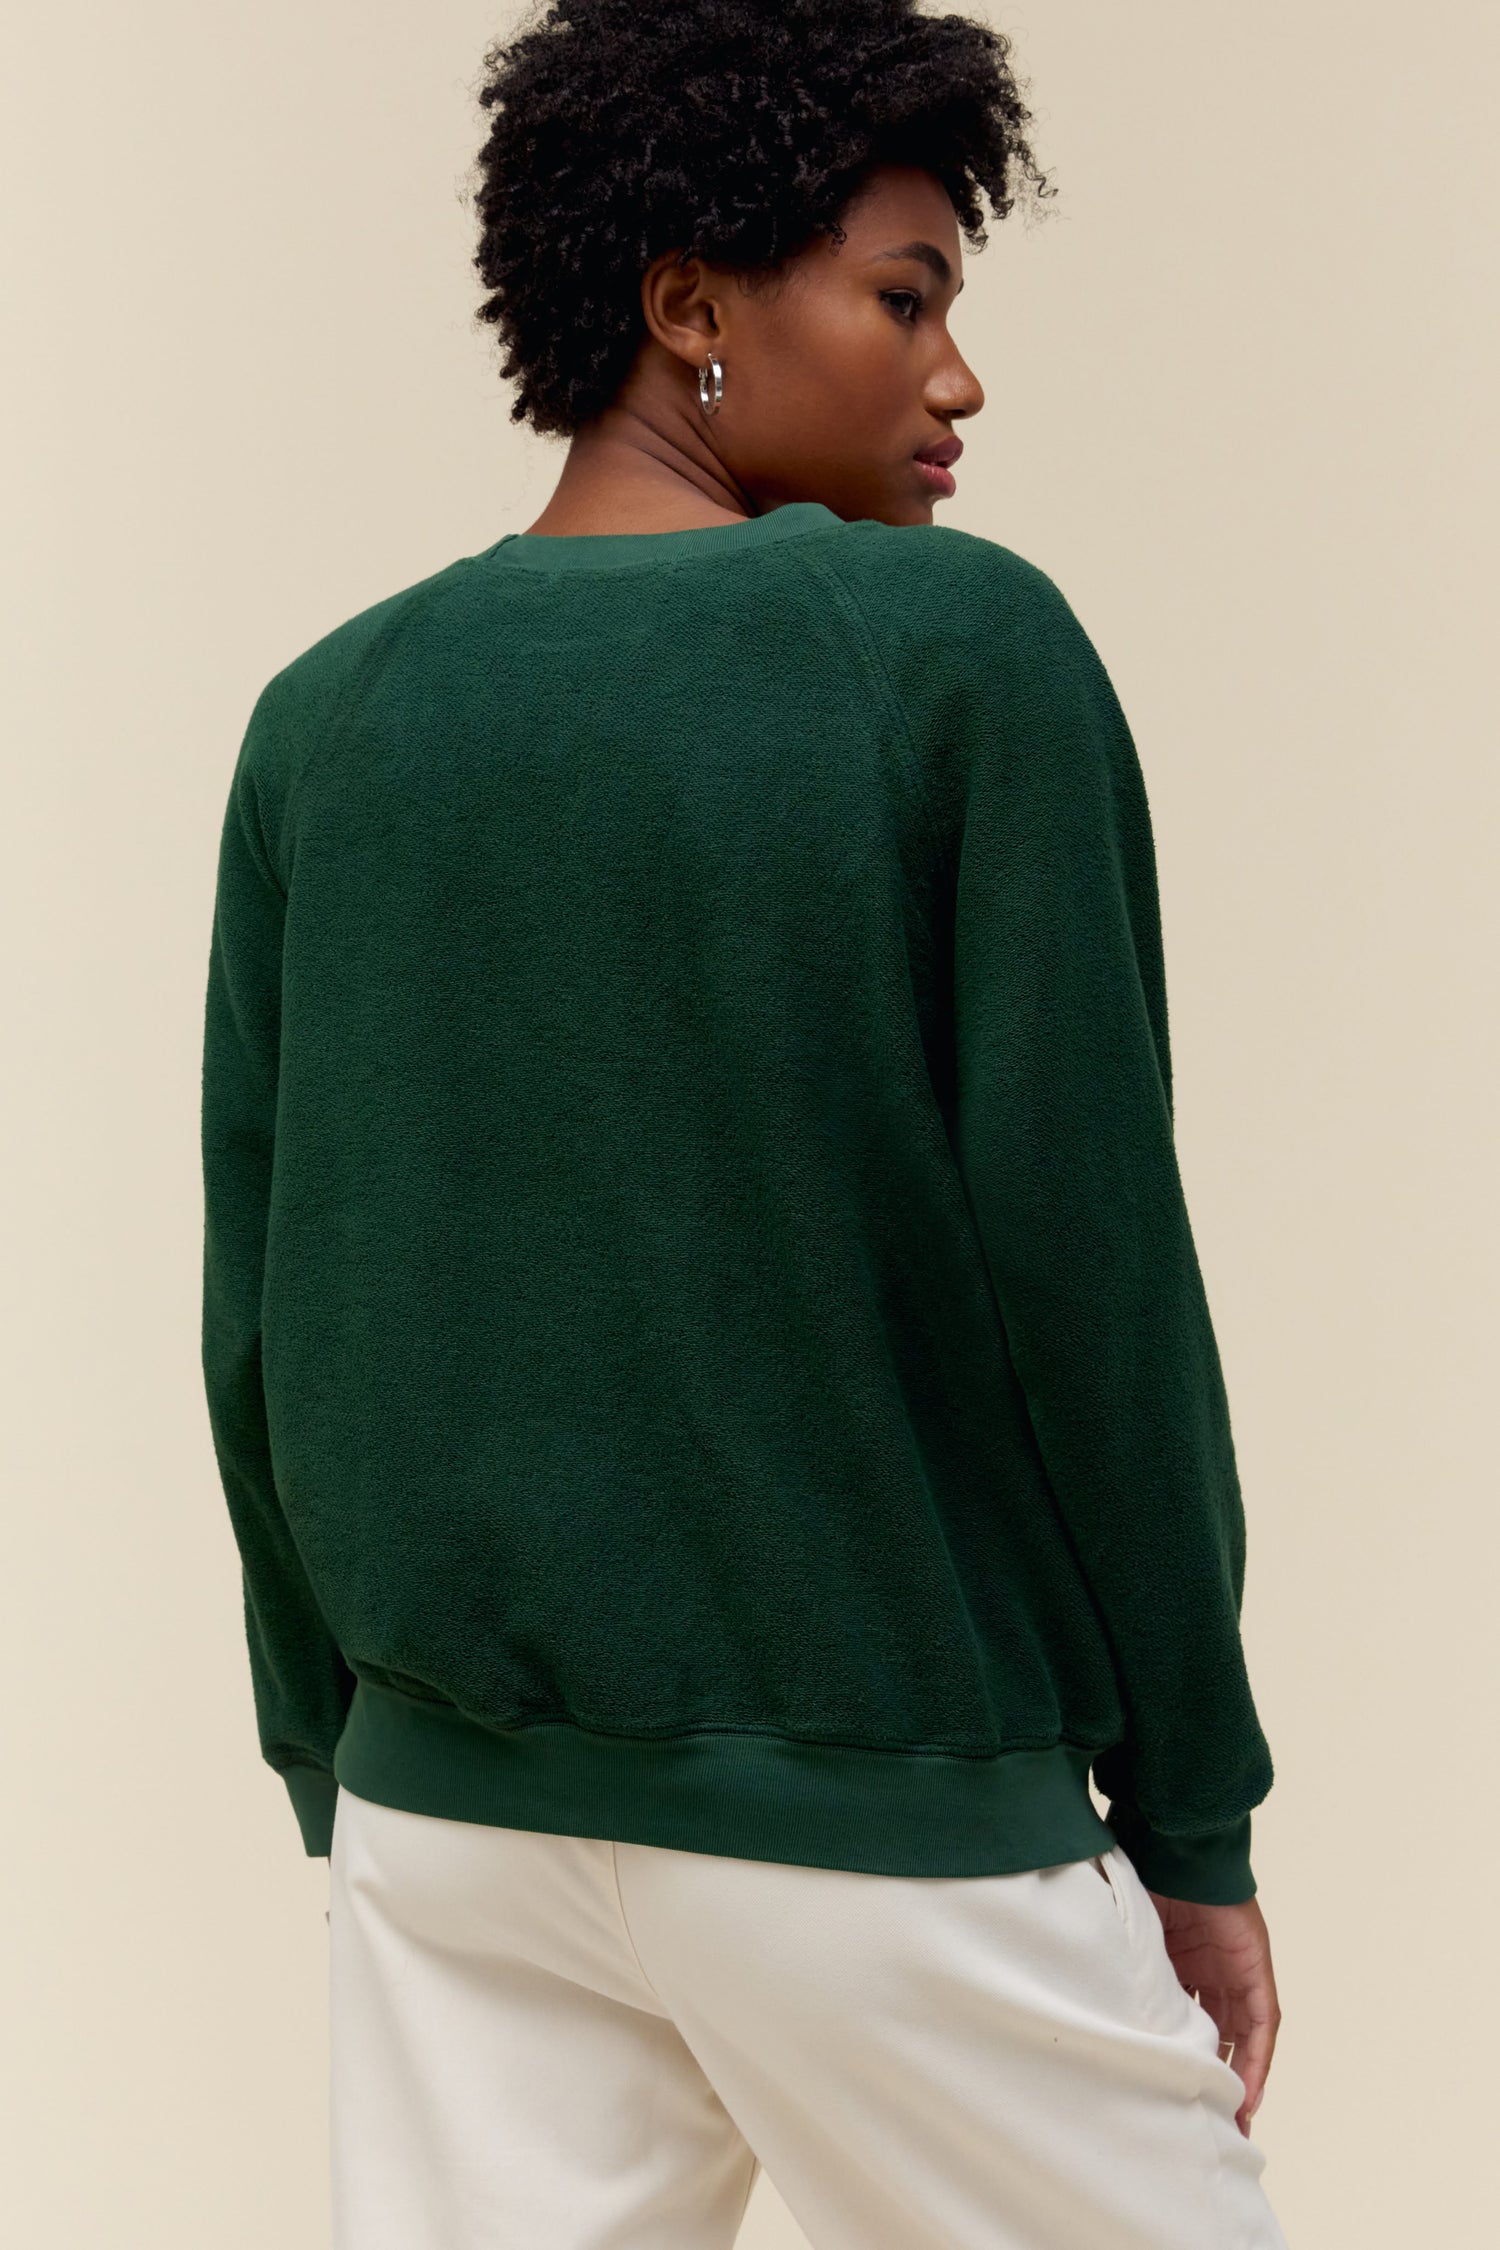 Model wearing a Sublime graphic sweatshirt in vintage green with a reverse fleece construction